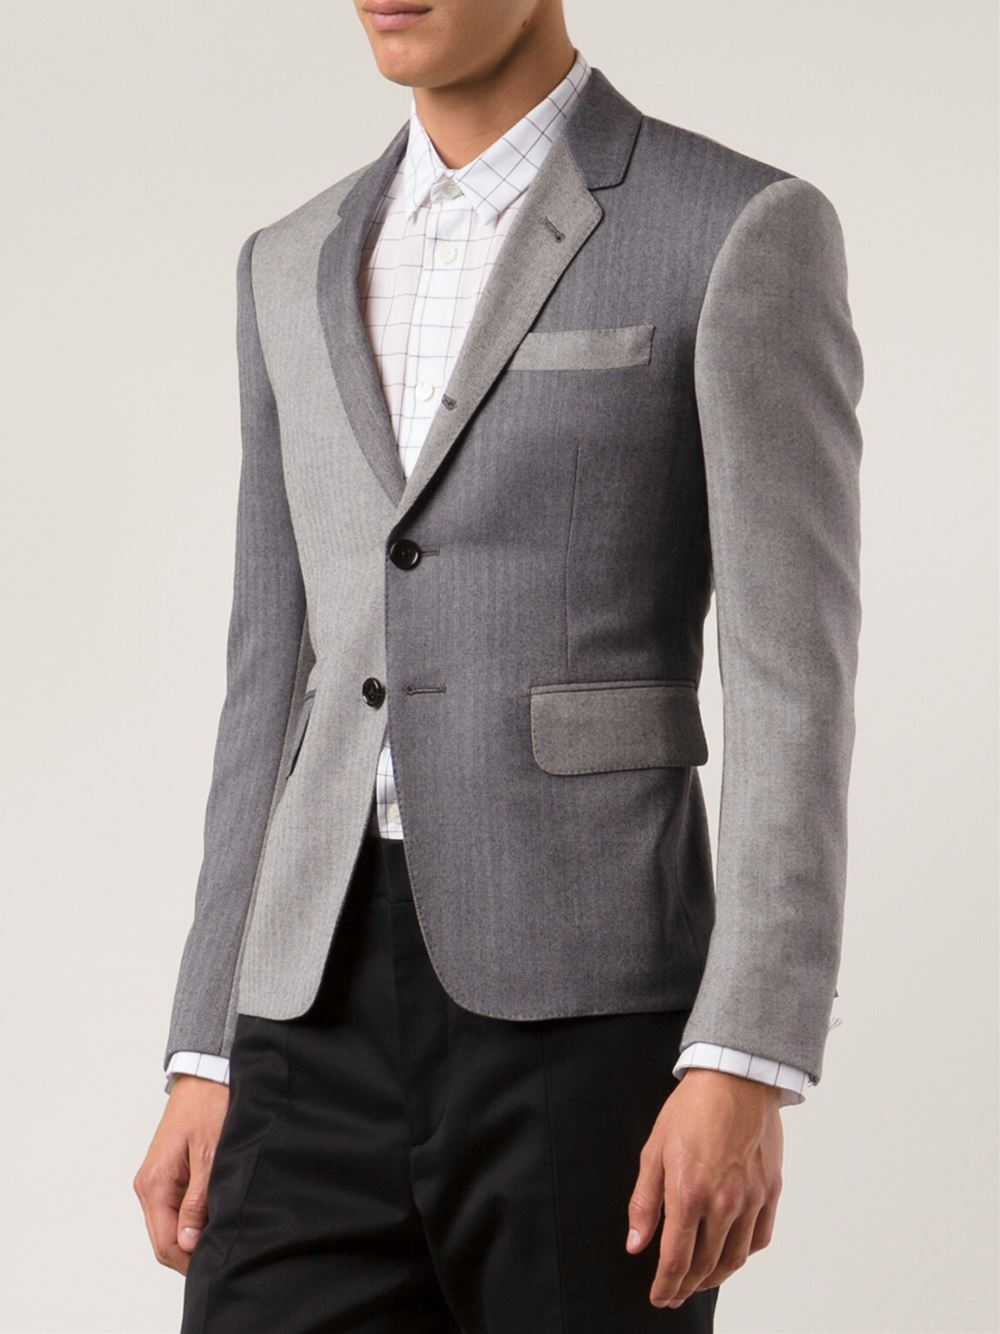 Thom Browne Two Tone Blazer in Blue for Men - Lyst